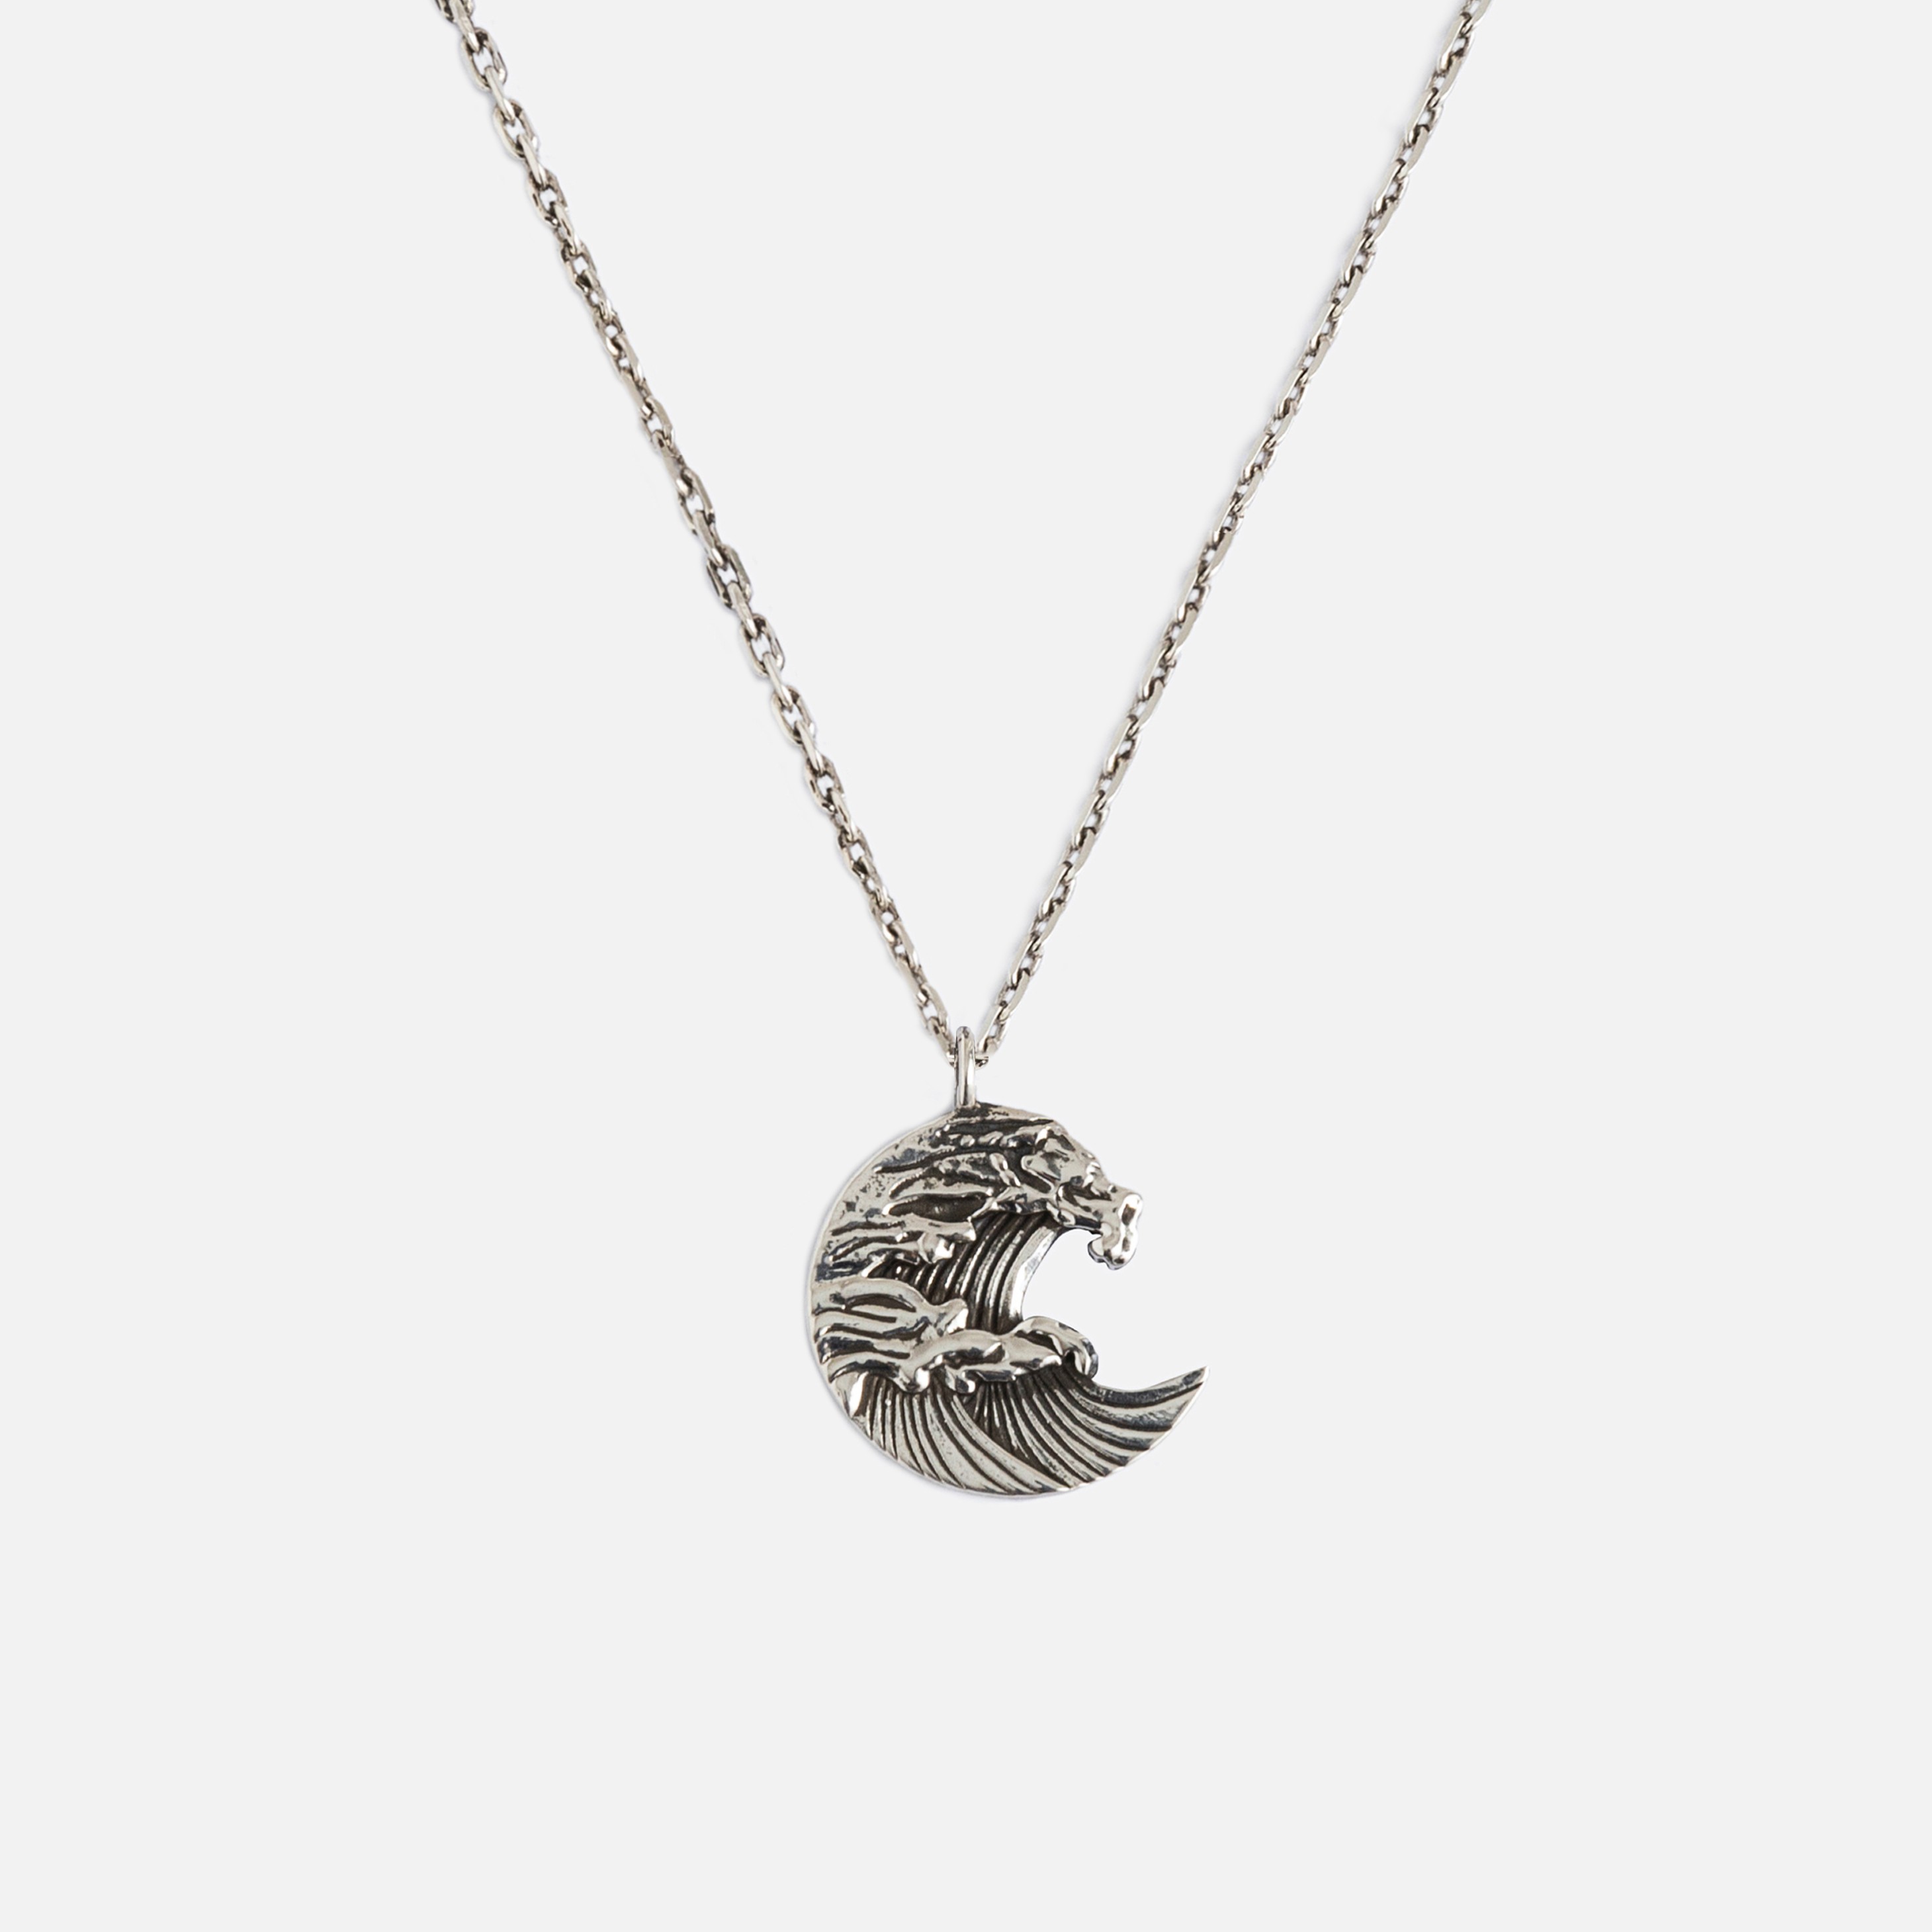 THE GREAT WAVE NECKLACE